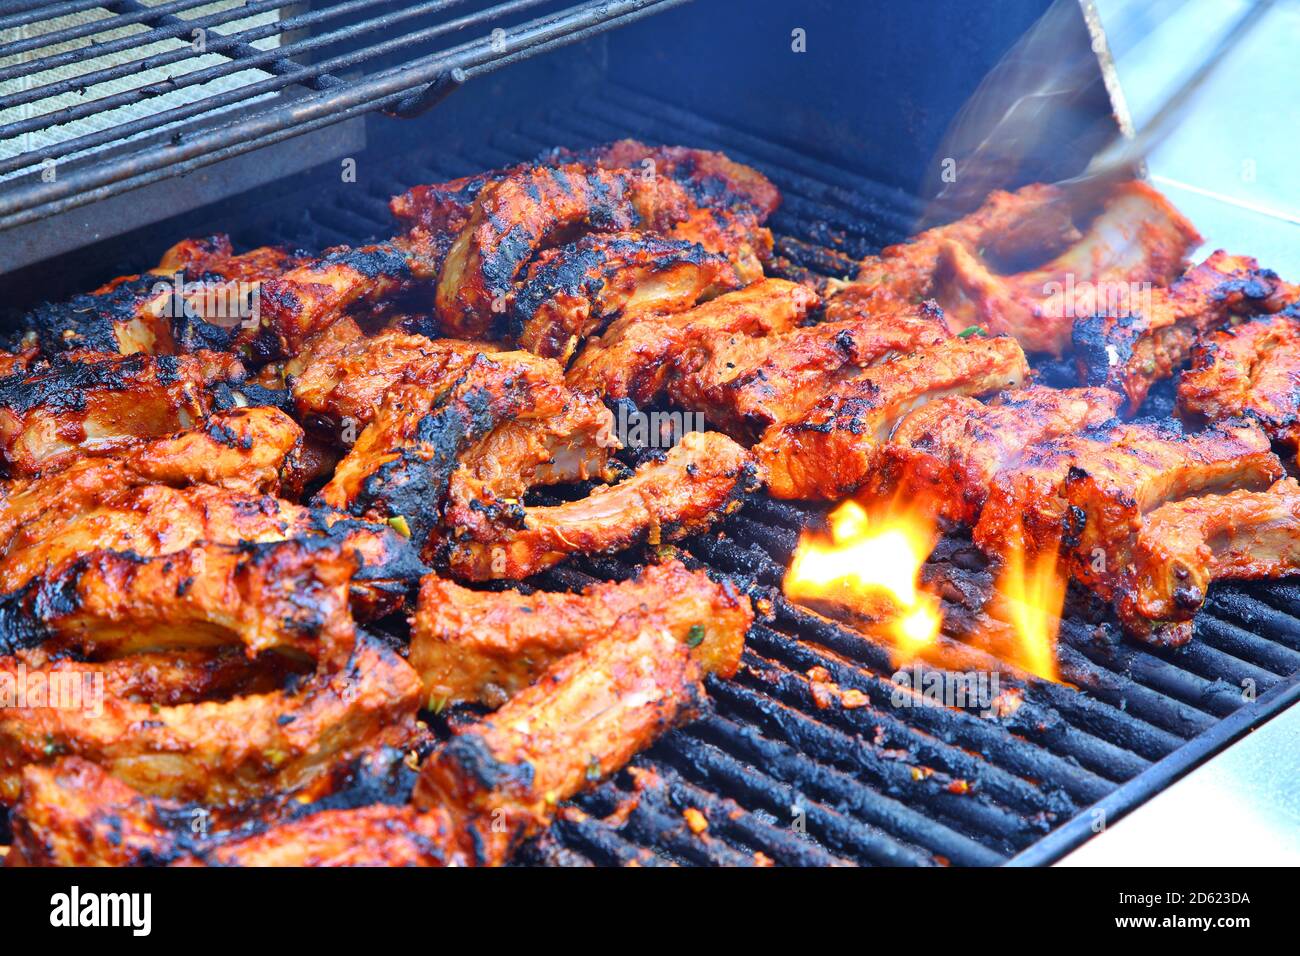 BBQ Pork Ribs Cooking on Grill Stock Photo